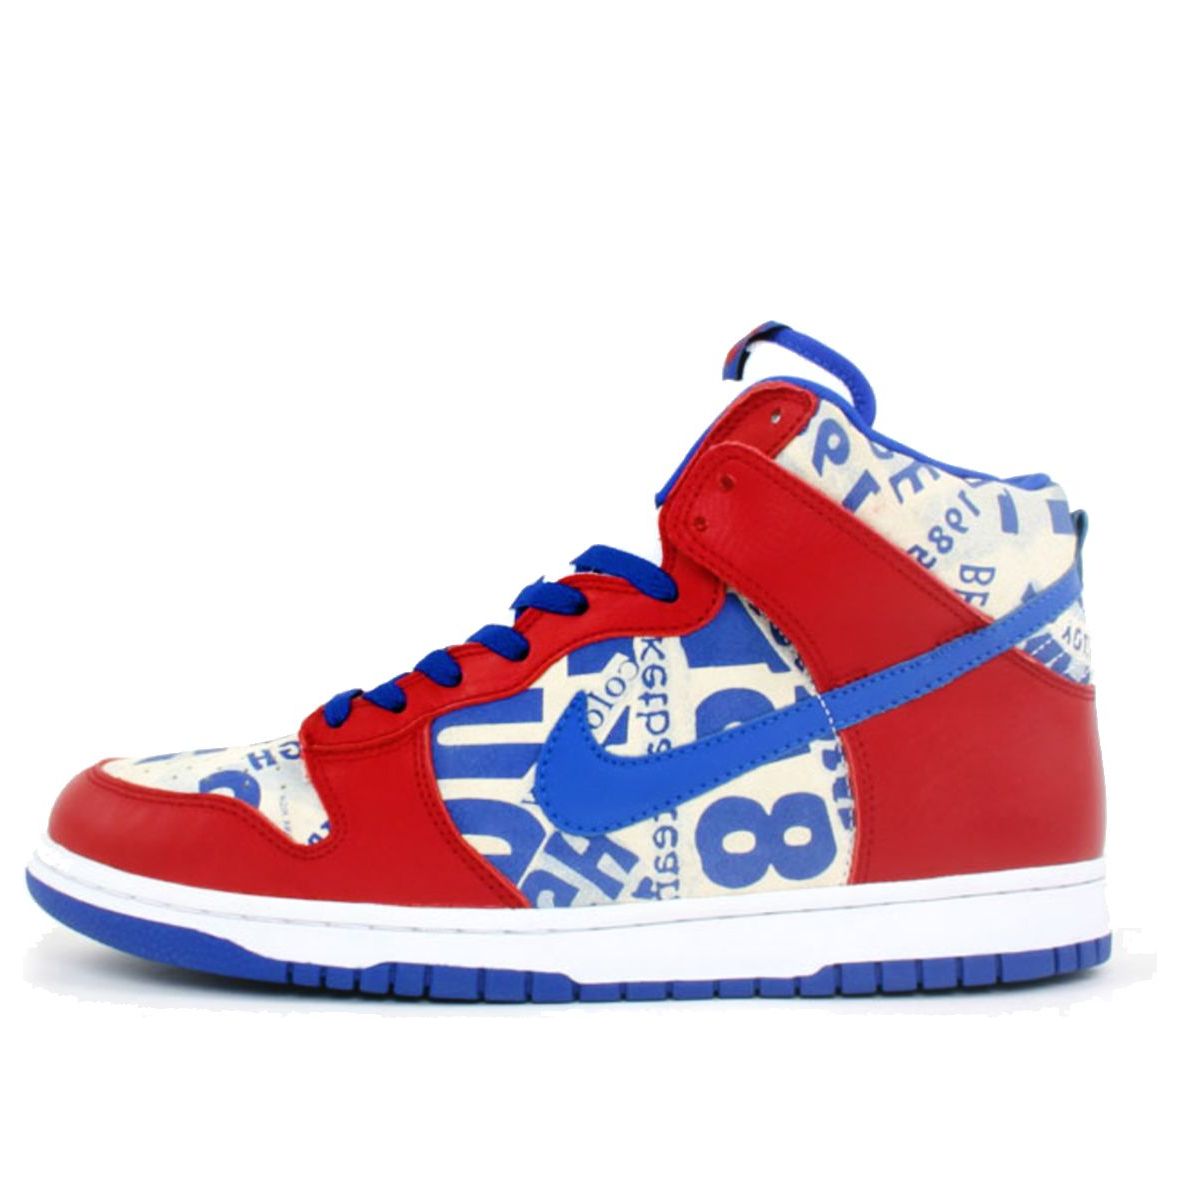 Nike Dunk High LTD 'Newspaper Pack Red White Blue'  308612-641 Iconic Trainers